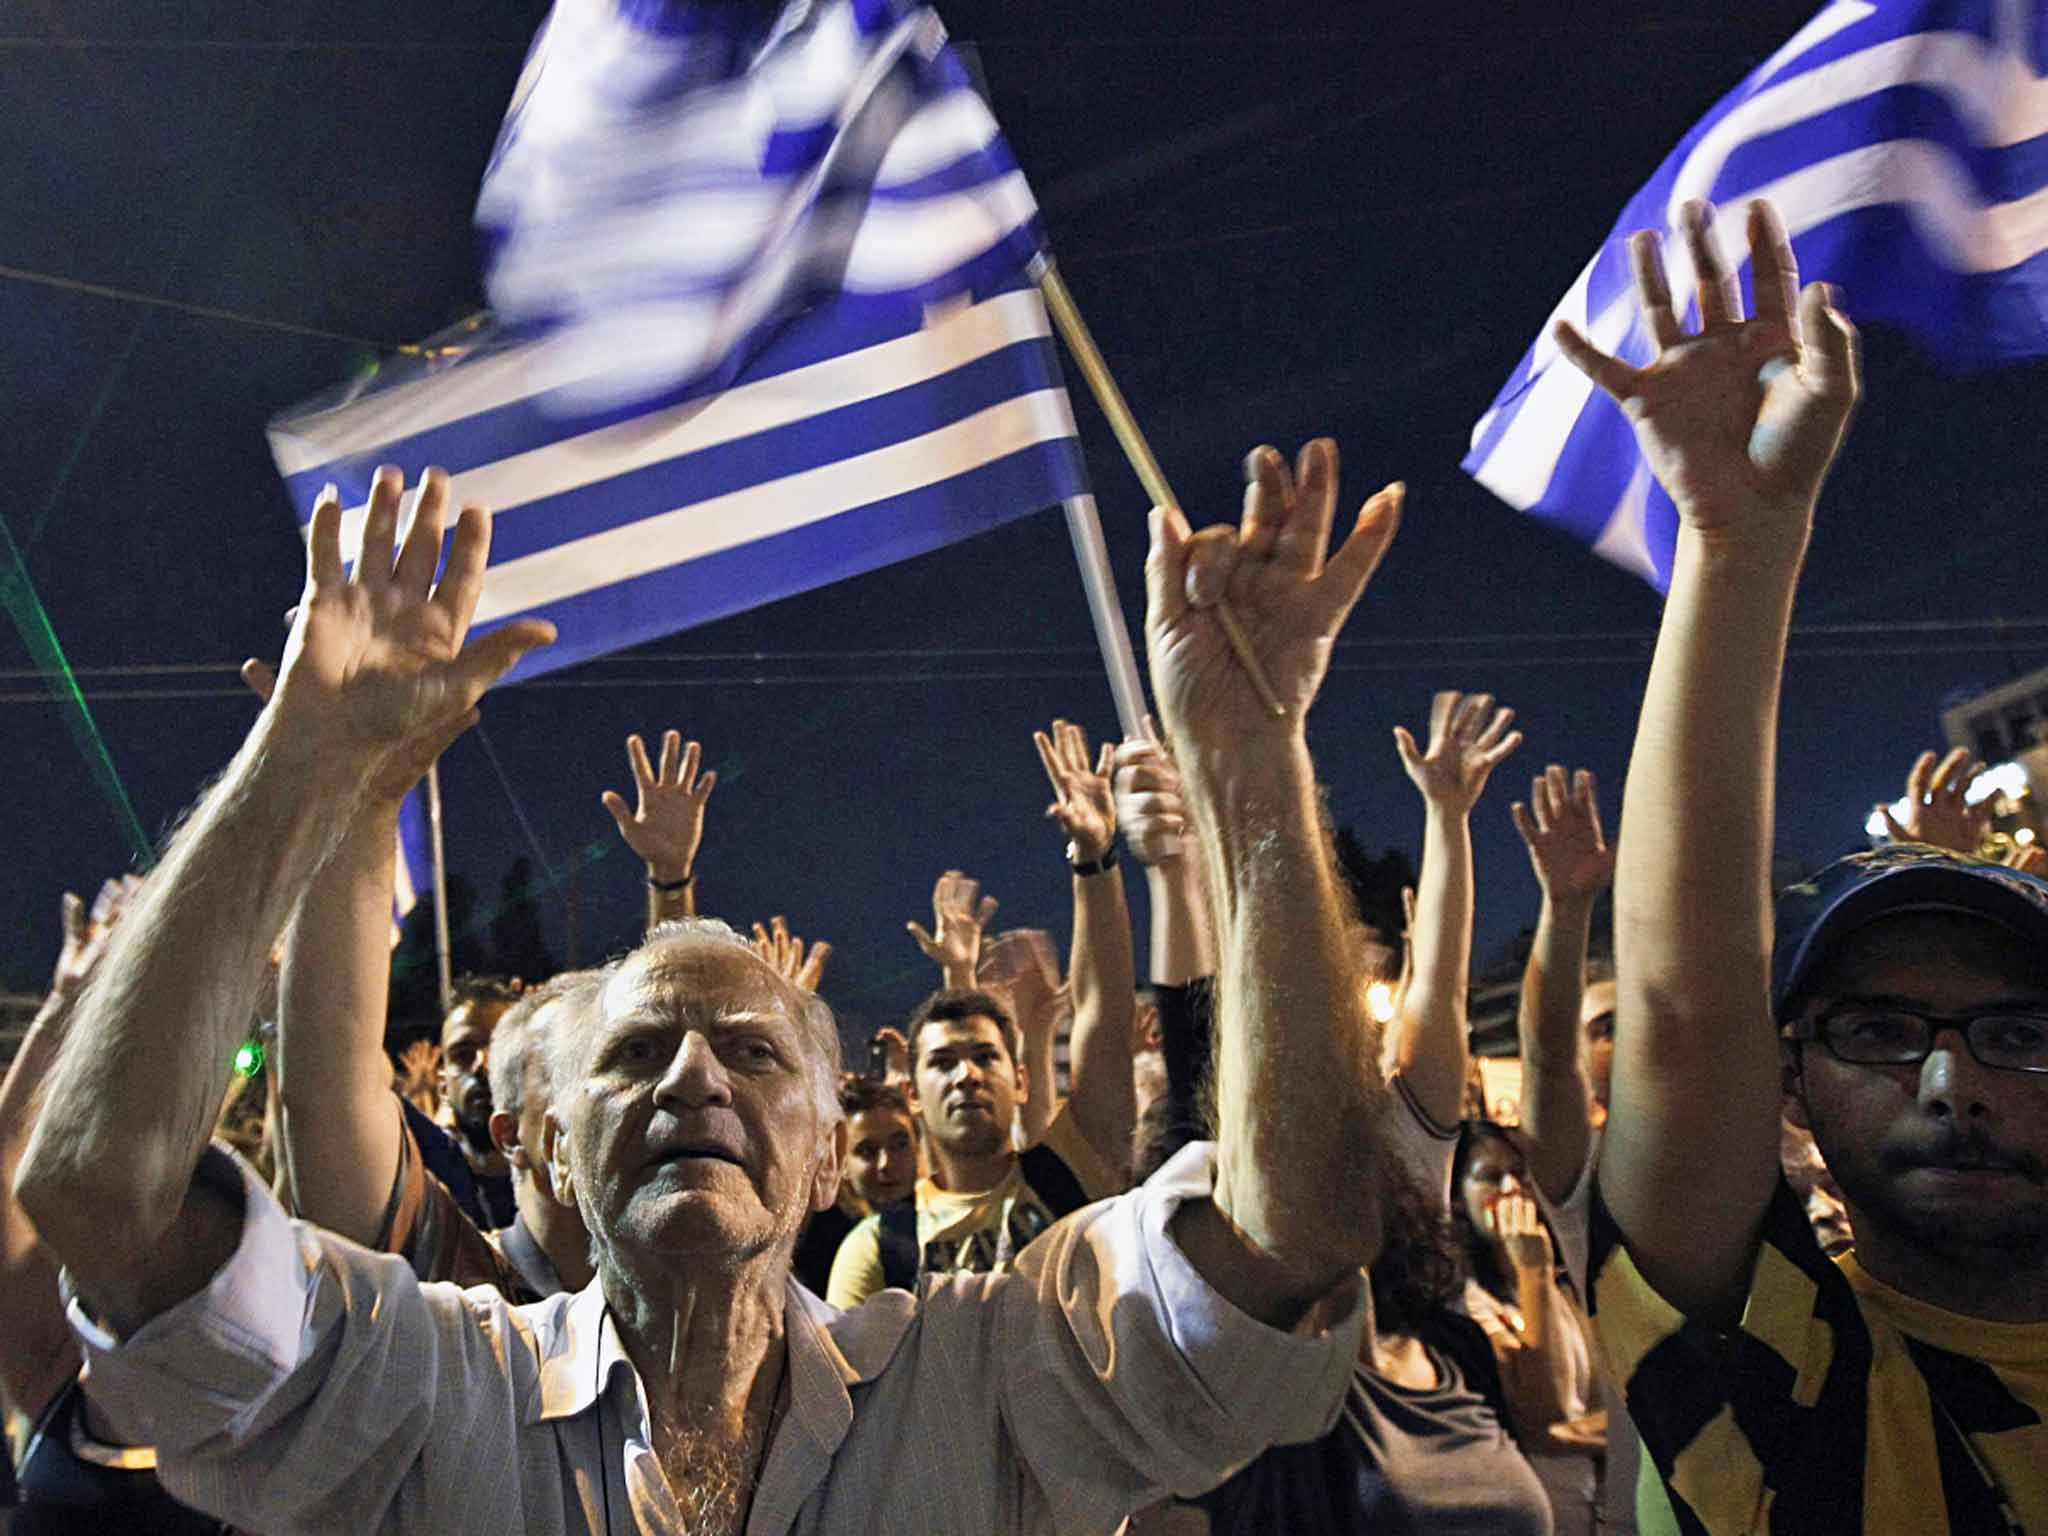 Protest rally in June 2011 in front of the parliament in Athens expresses opposition to a new austerity package